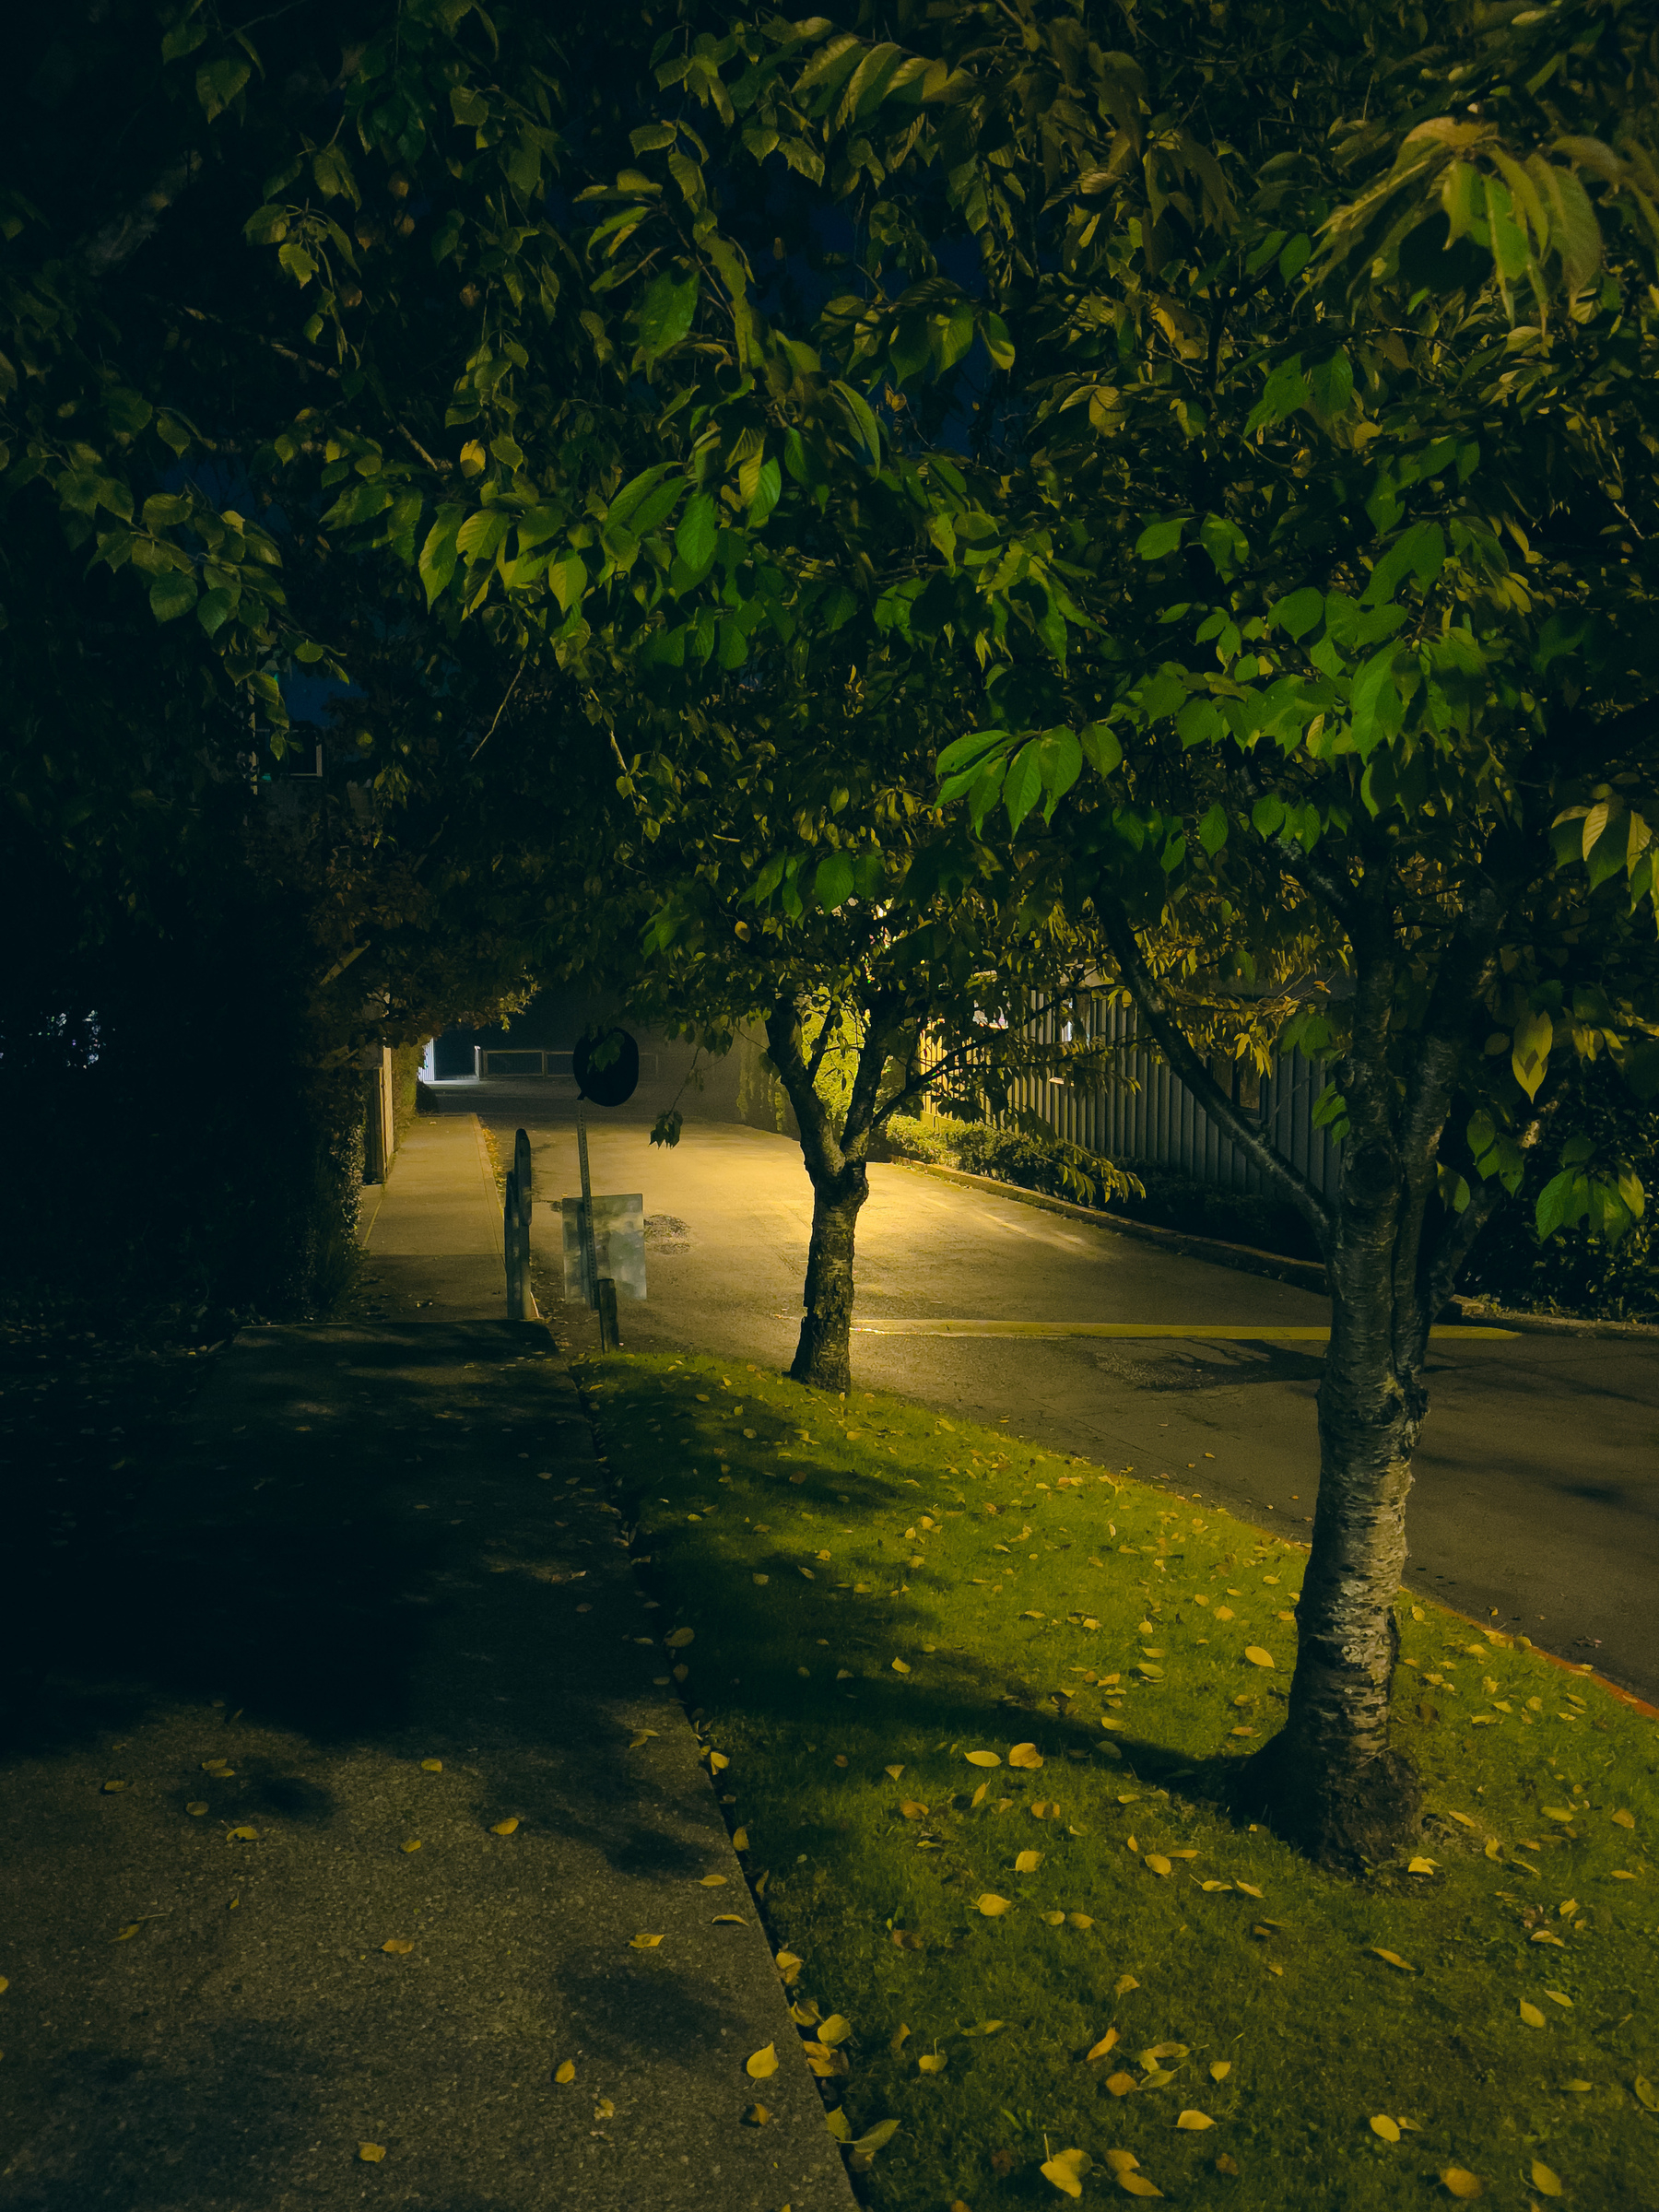 Streetscape through trees at night.